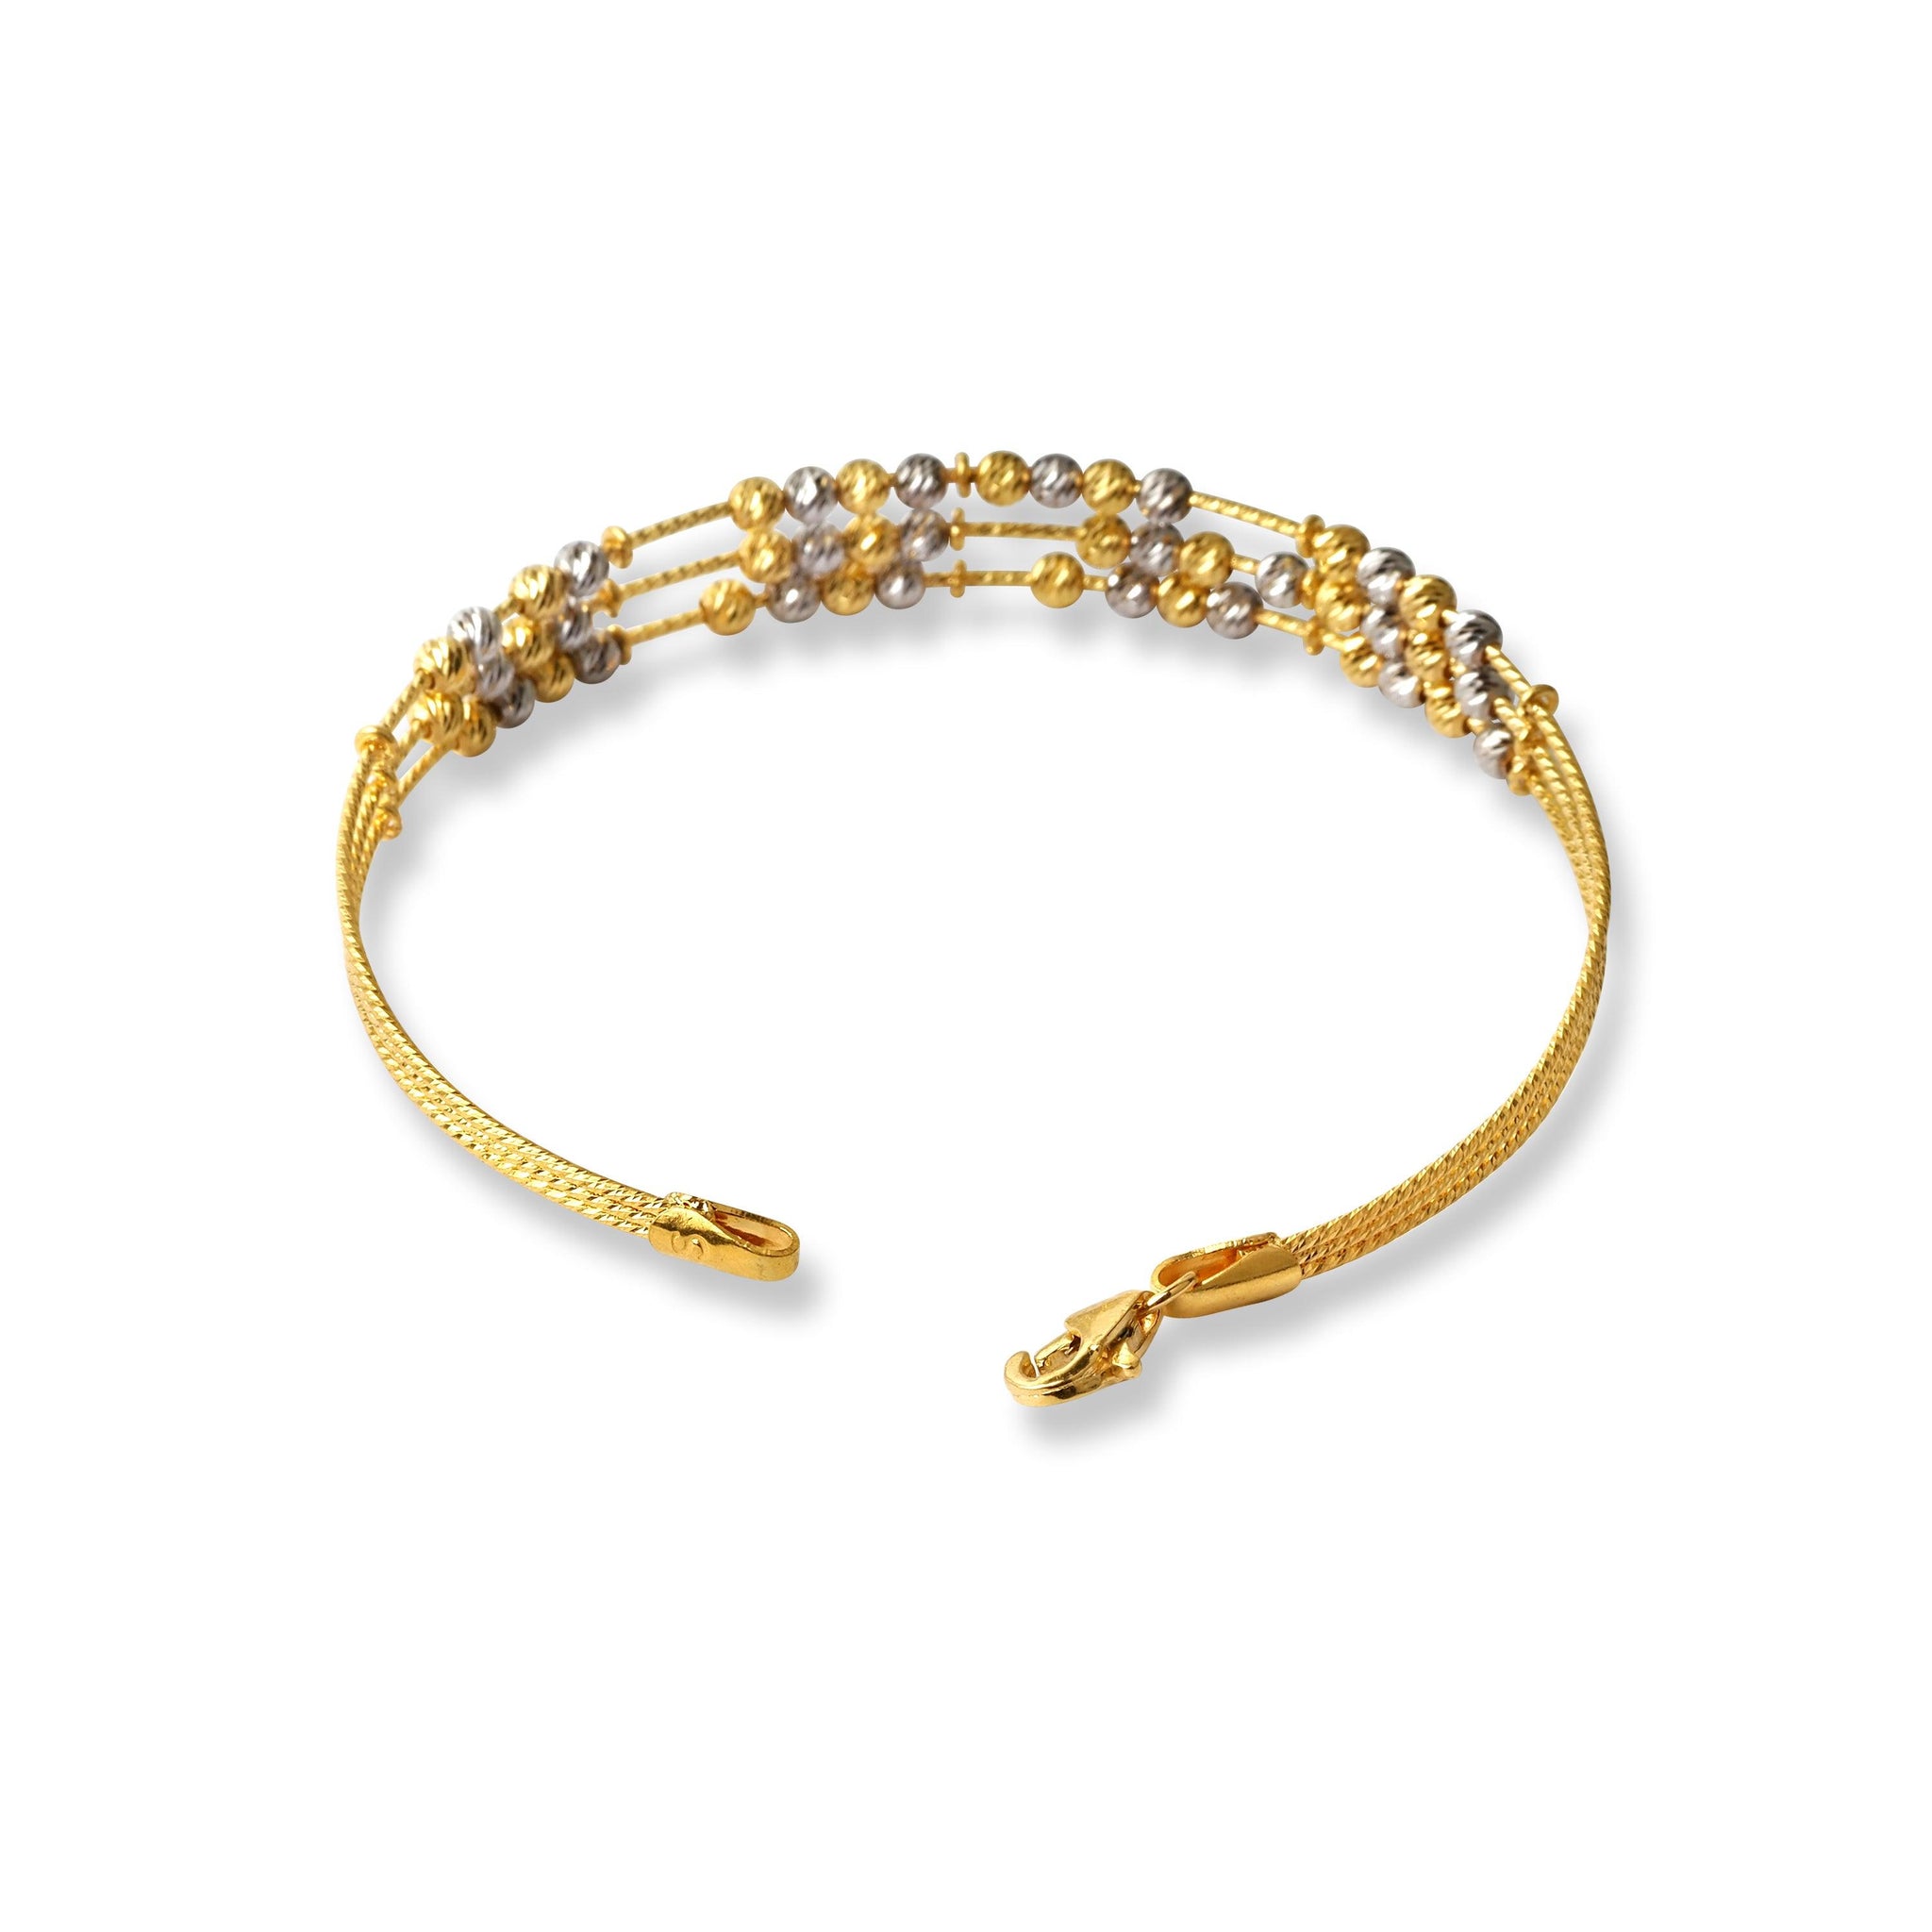 22ct Gold Rhodium Plated Beads Bangle With Rounded Trigger Clasp (11.0g) B-8522